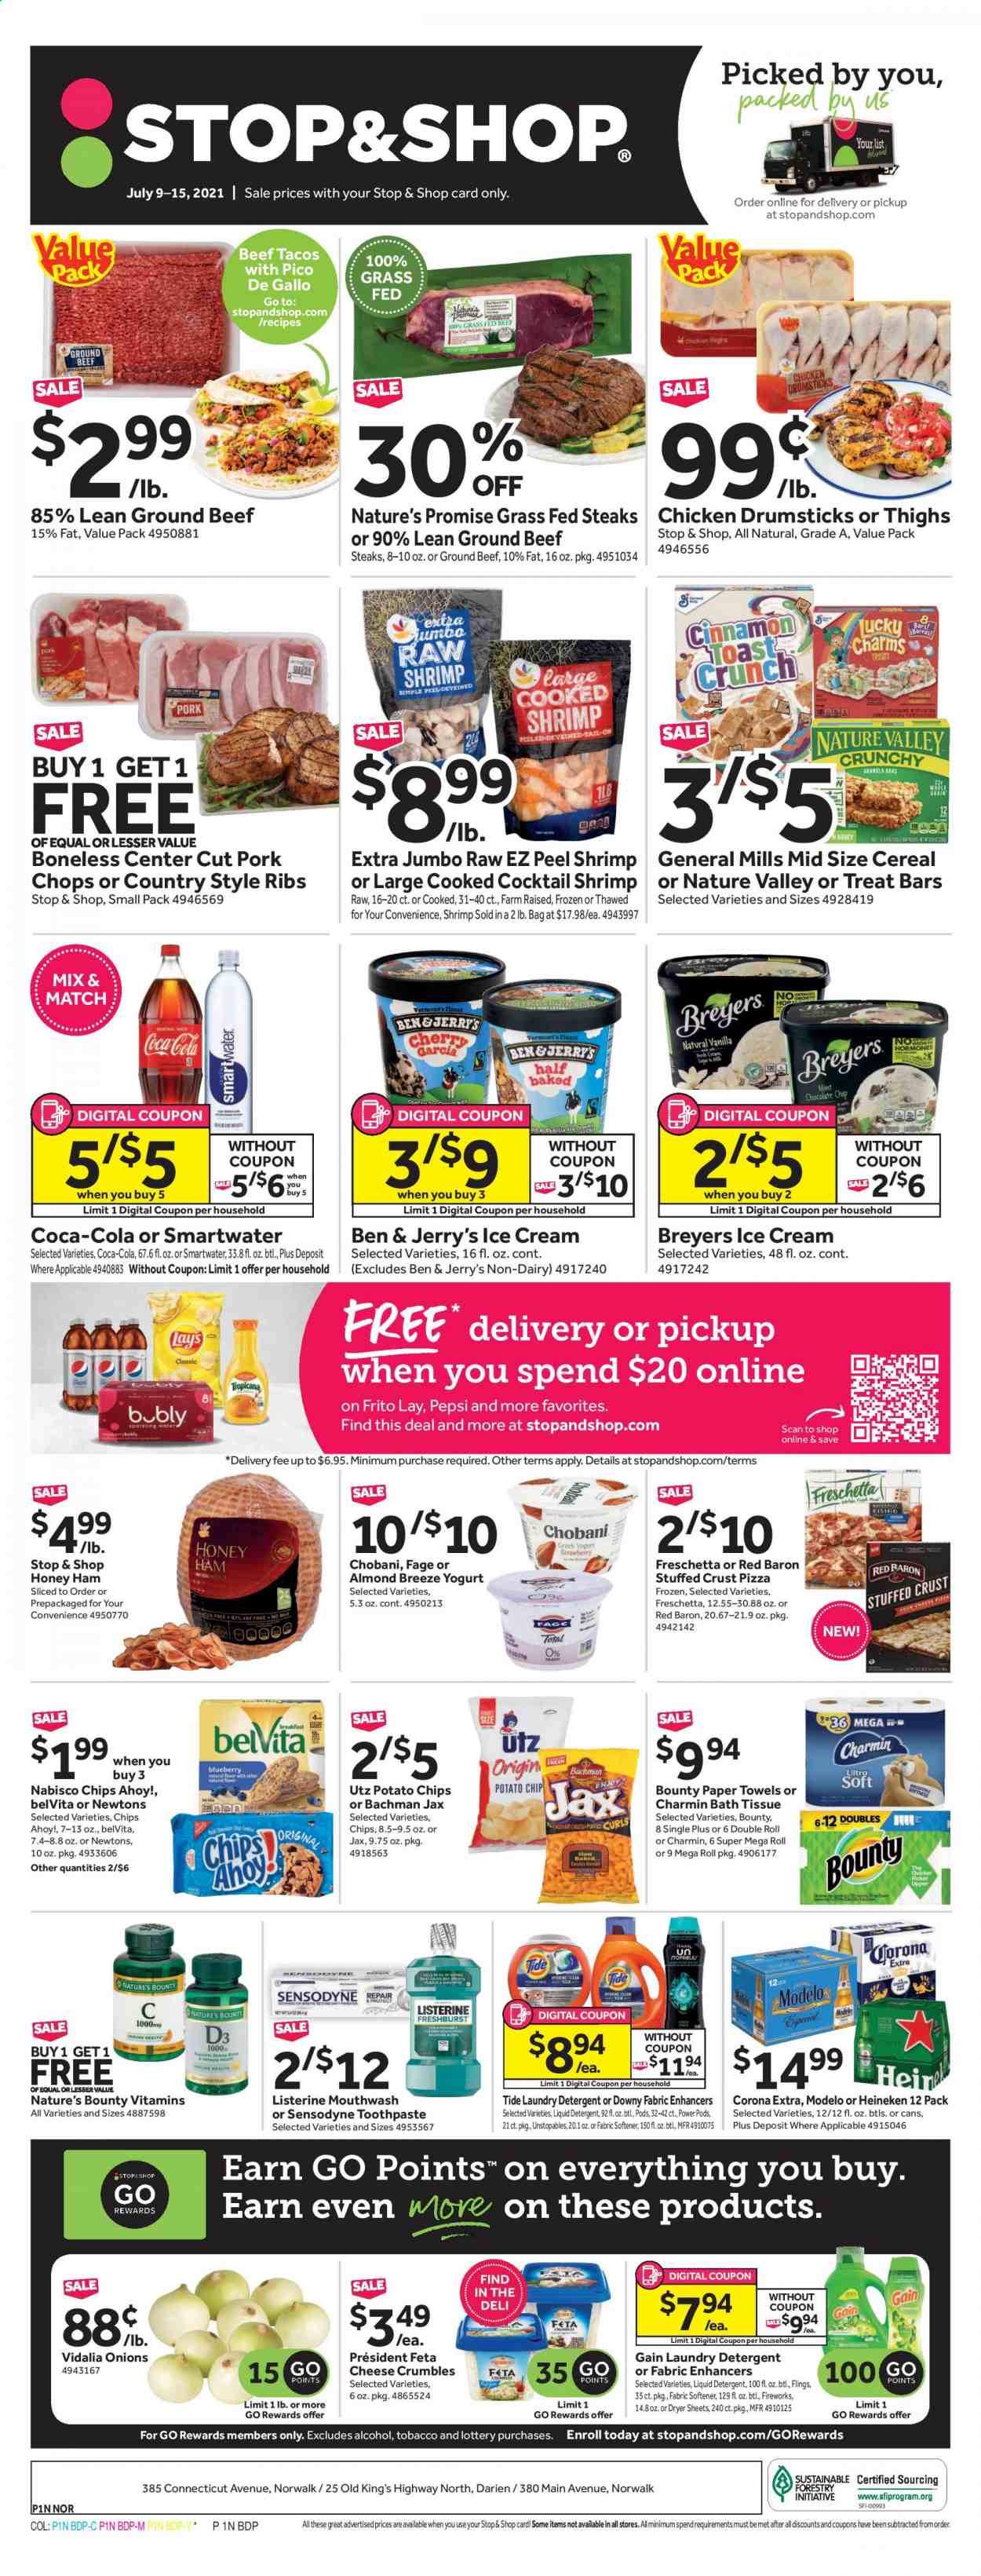 thumbnail - Stop & Shop Flyer - 07/09/2021 - 07/15/2021 - Sales products - Nature’s Promise, tacos, onion, cherries, chicken drumsticks, beef meat, beef steak, ground beef, steak, pork chops, pork meat, pork ribs, country style ribs, shrimps, pizza, ham, Président, feta, cheese crumbles, greek yoghurt, yoghurt, Chobani, Almond Breeze, ice cream, Ben & Jerry's, Red Baron, Chips Ahoy!, potato chips, Lay’s, cereals, granola bar, belVita, Nature Valley, cinnamon, Coca-Cola, Pepsi, sparkling water, Smartwater, beer, Corona Extra, Heineken, Modelo, bath tissue, kitchen towels, paper towels, Charmin, Gain, Tide, Unstopables, fabric softener, liquid detergent, laundry detergent, dryer sheets, Downy Laundry, Listerine, toothpaste, Sensodyne, mouthwash, pin, Nature's Bounty, vitamin D3. Page 1.